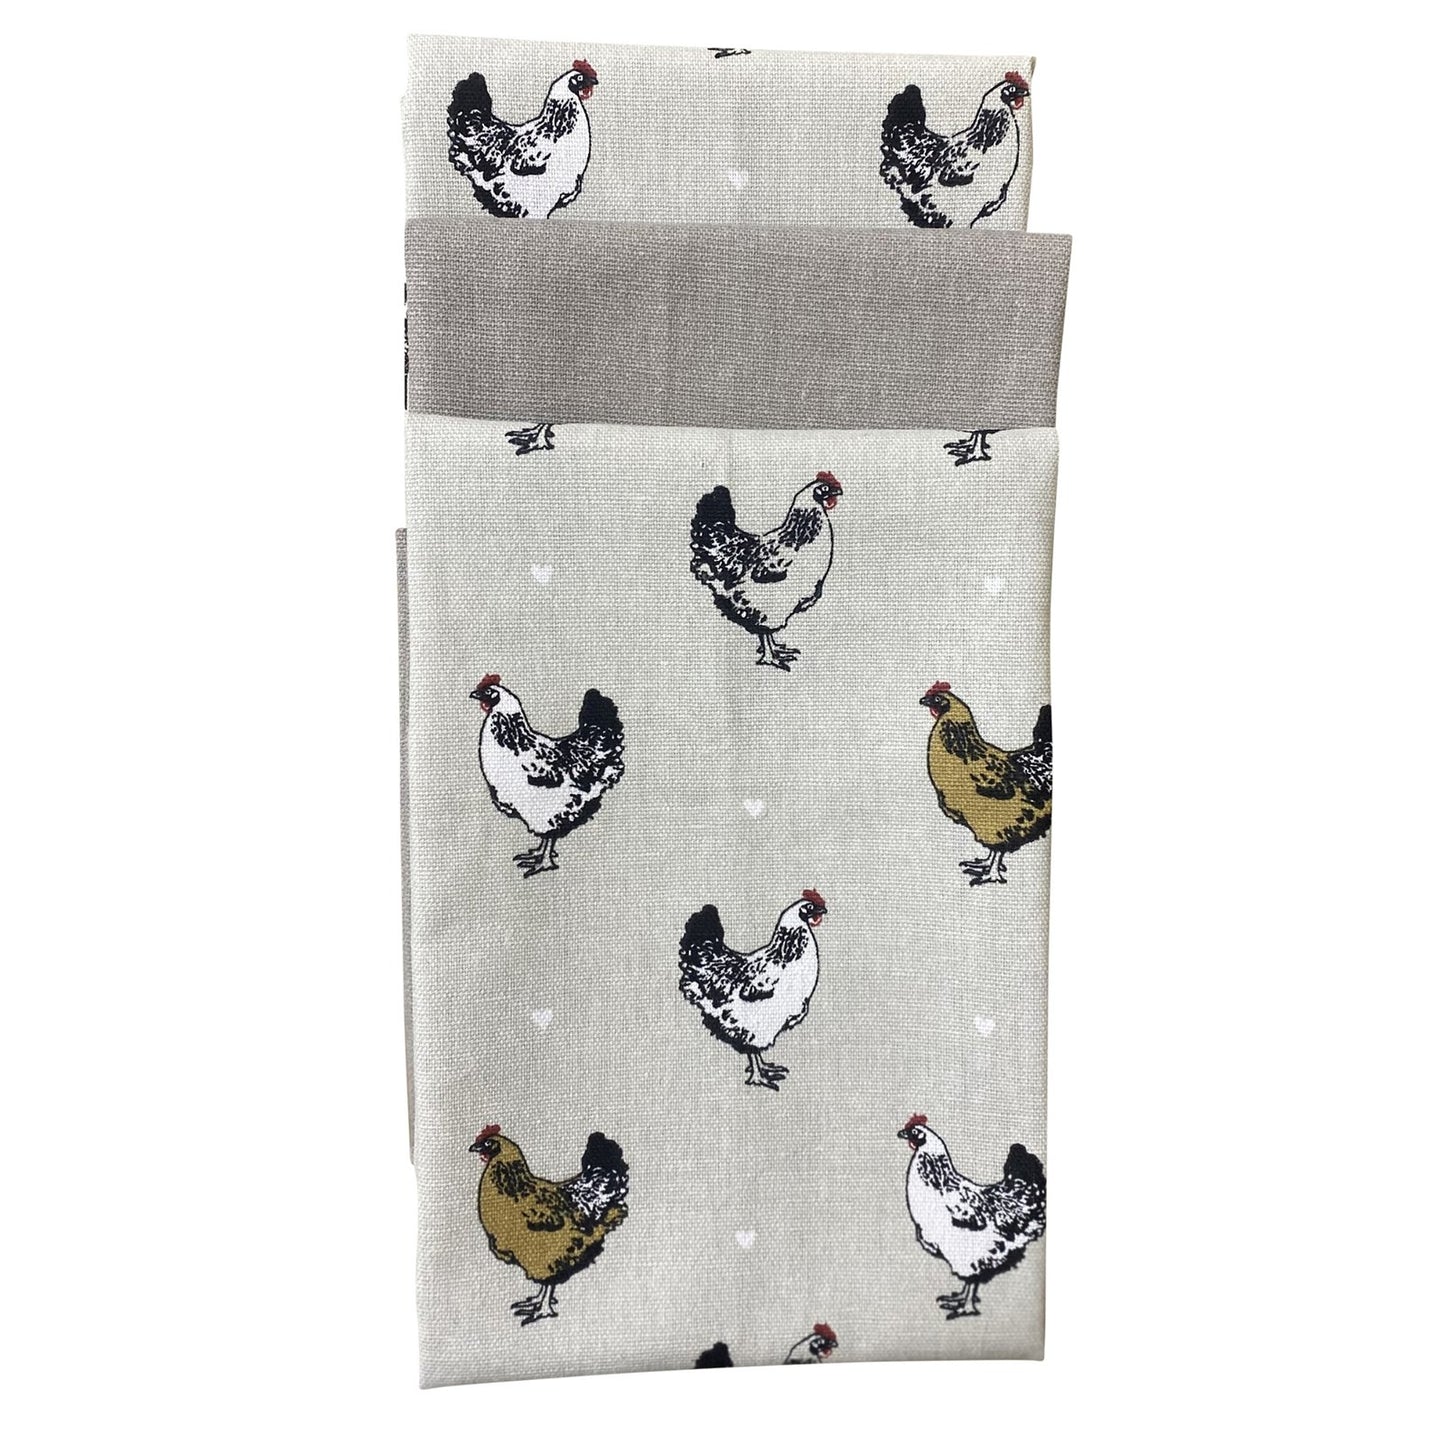 Pack of Three Tea Towels With A Chicken Print Design